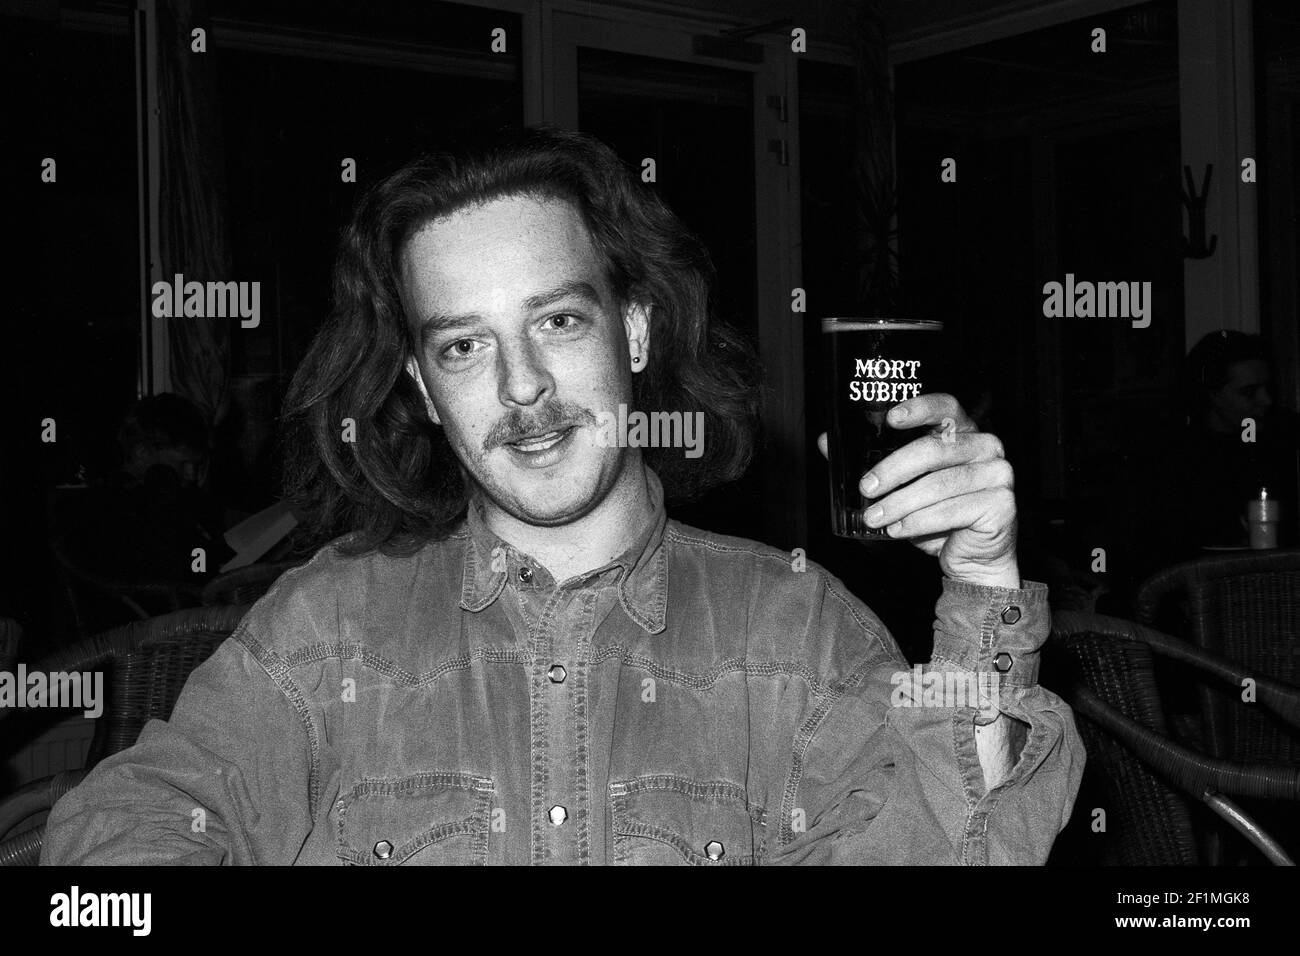 Tilburg, Netherlands. Portrait of a long haired yound adult male drinking a Mort Subite craftbeer. Stock Photo